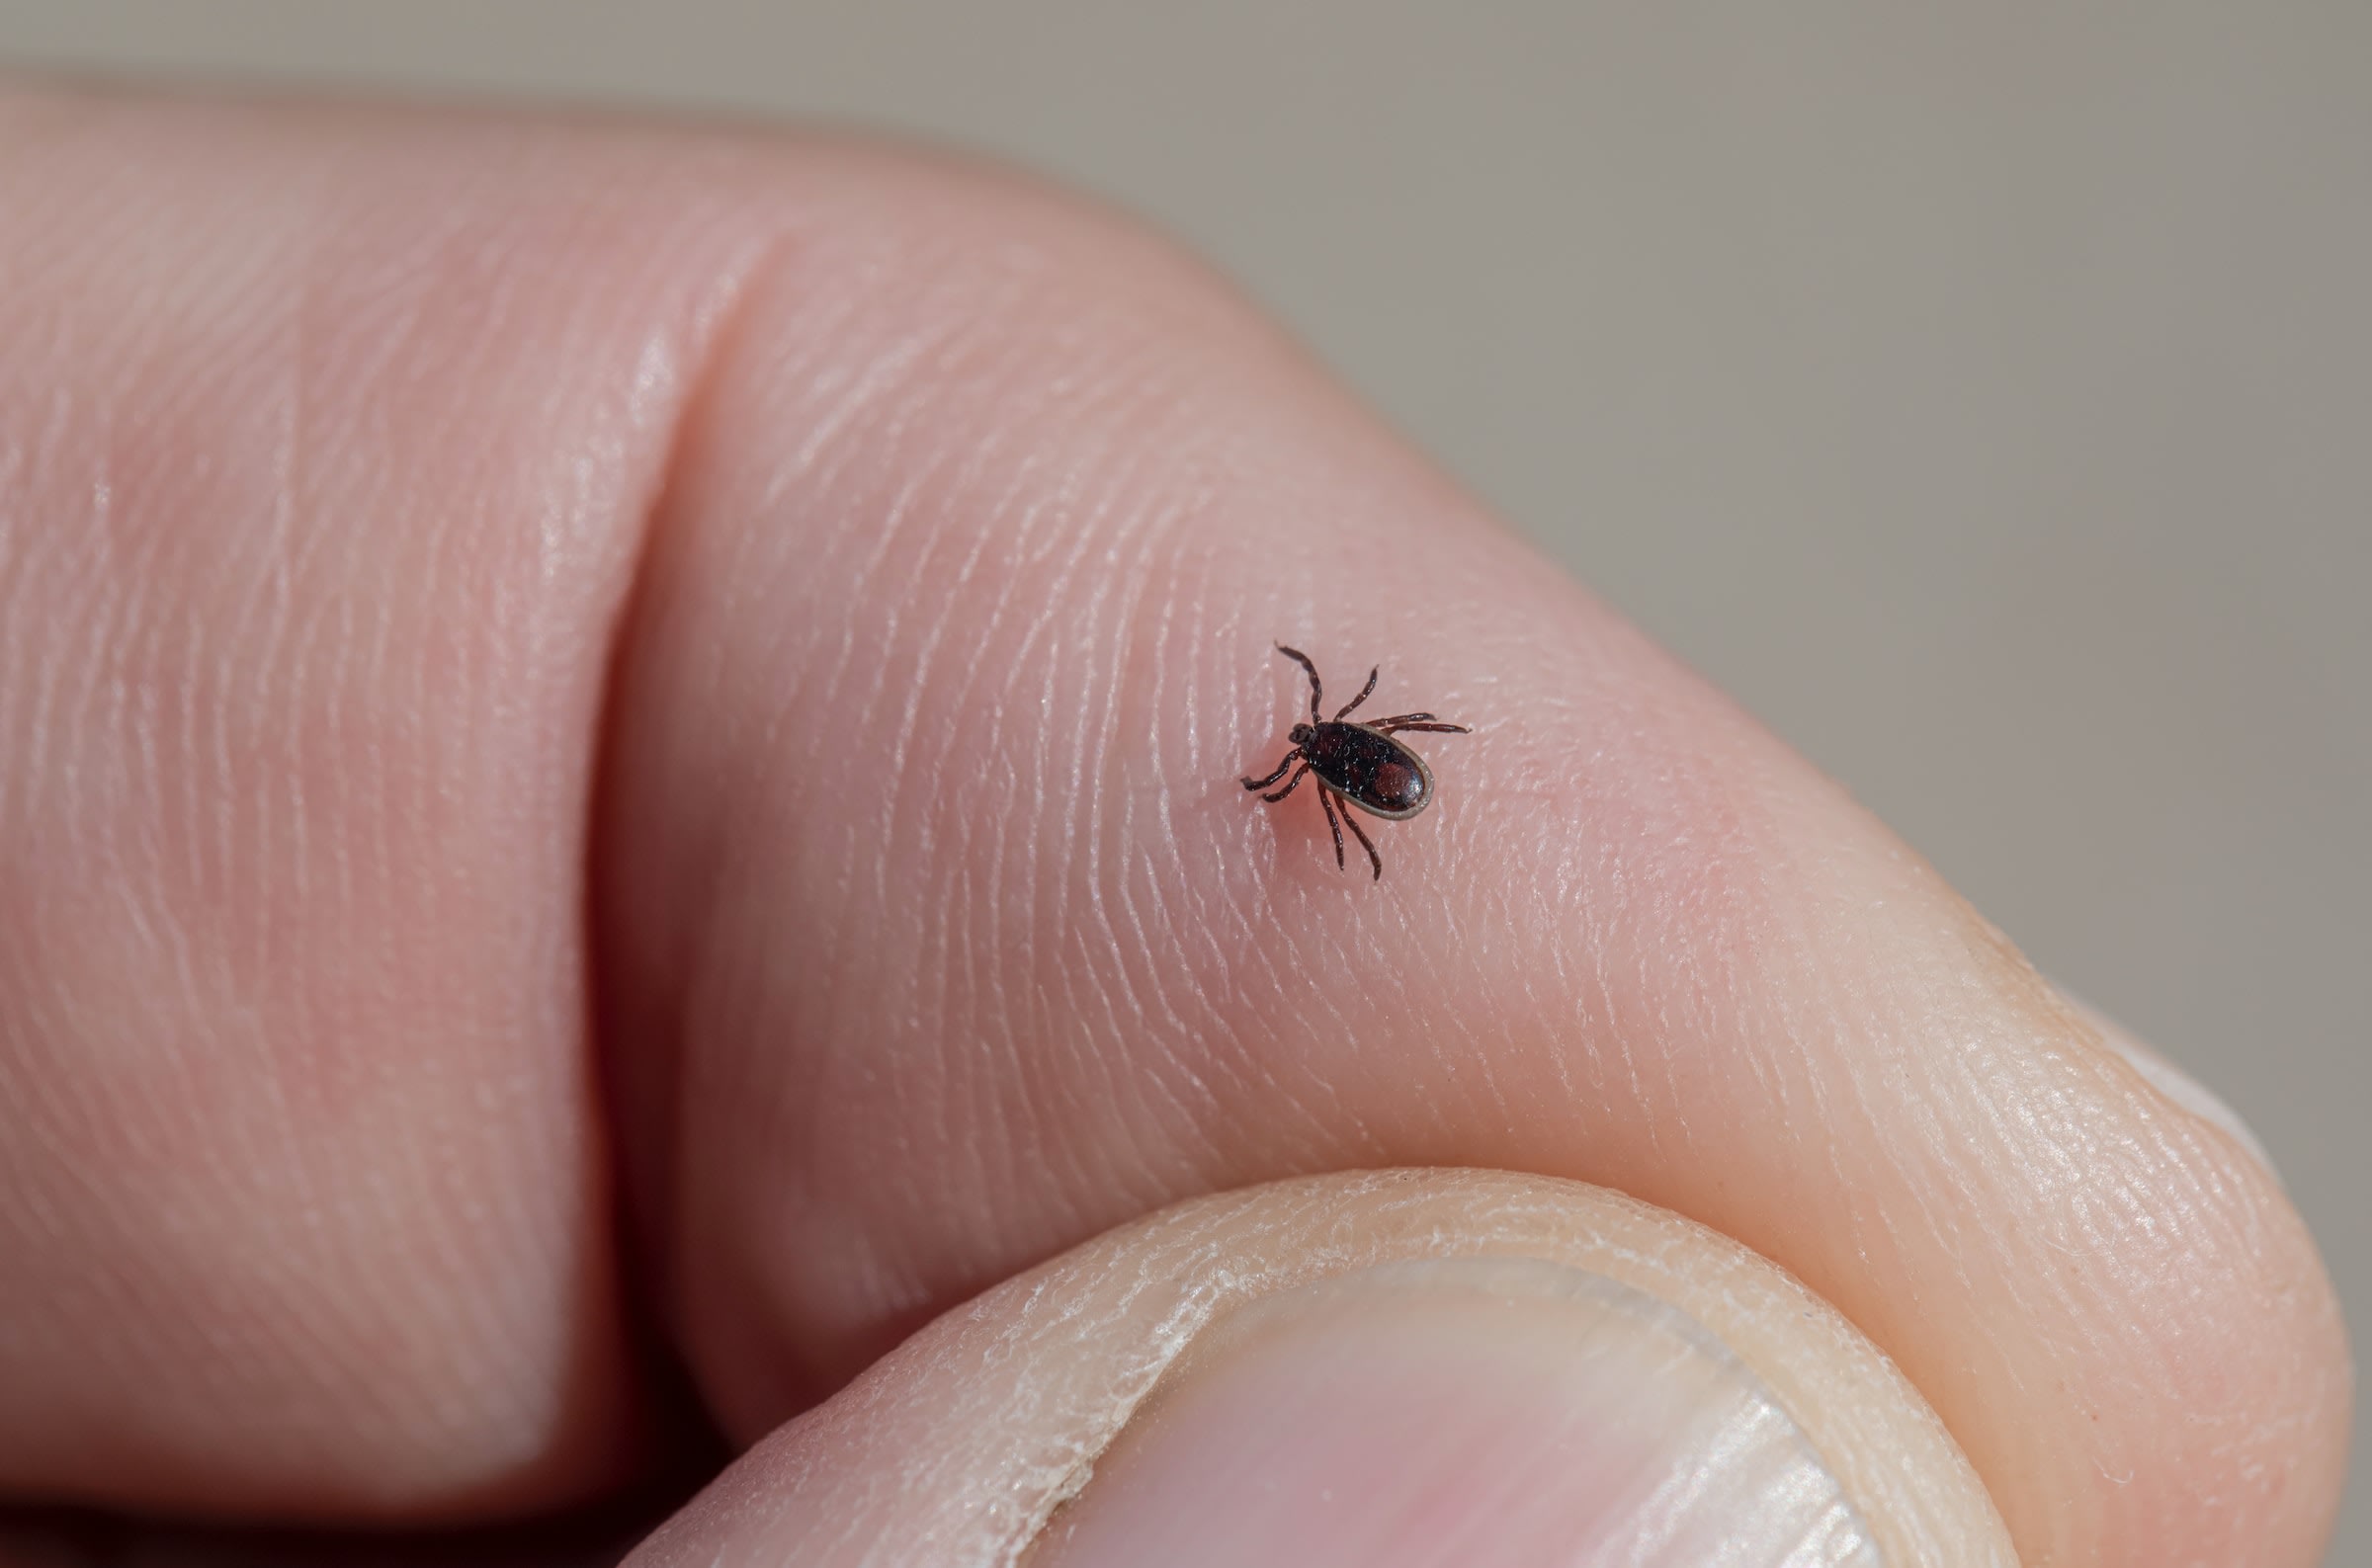 A close-up of a deer tick crawling on a man's index finger.